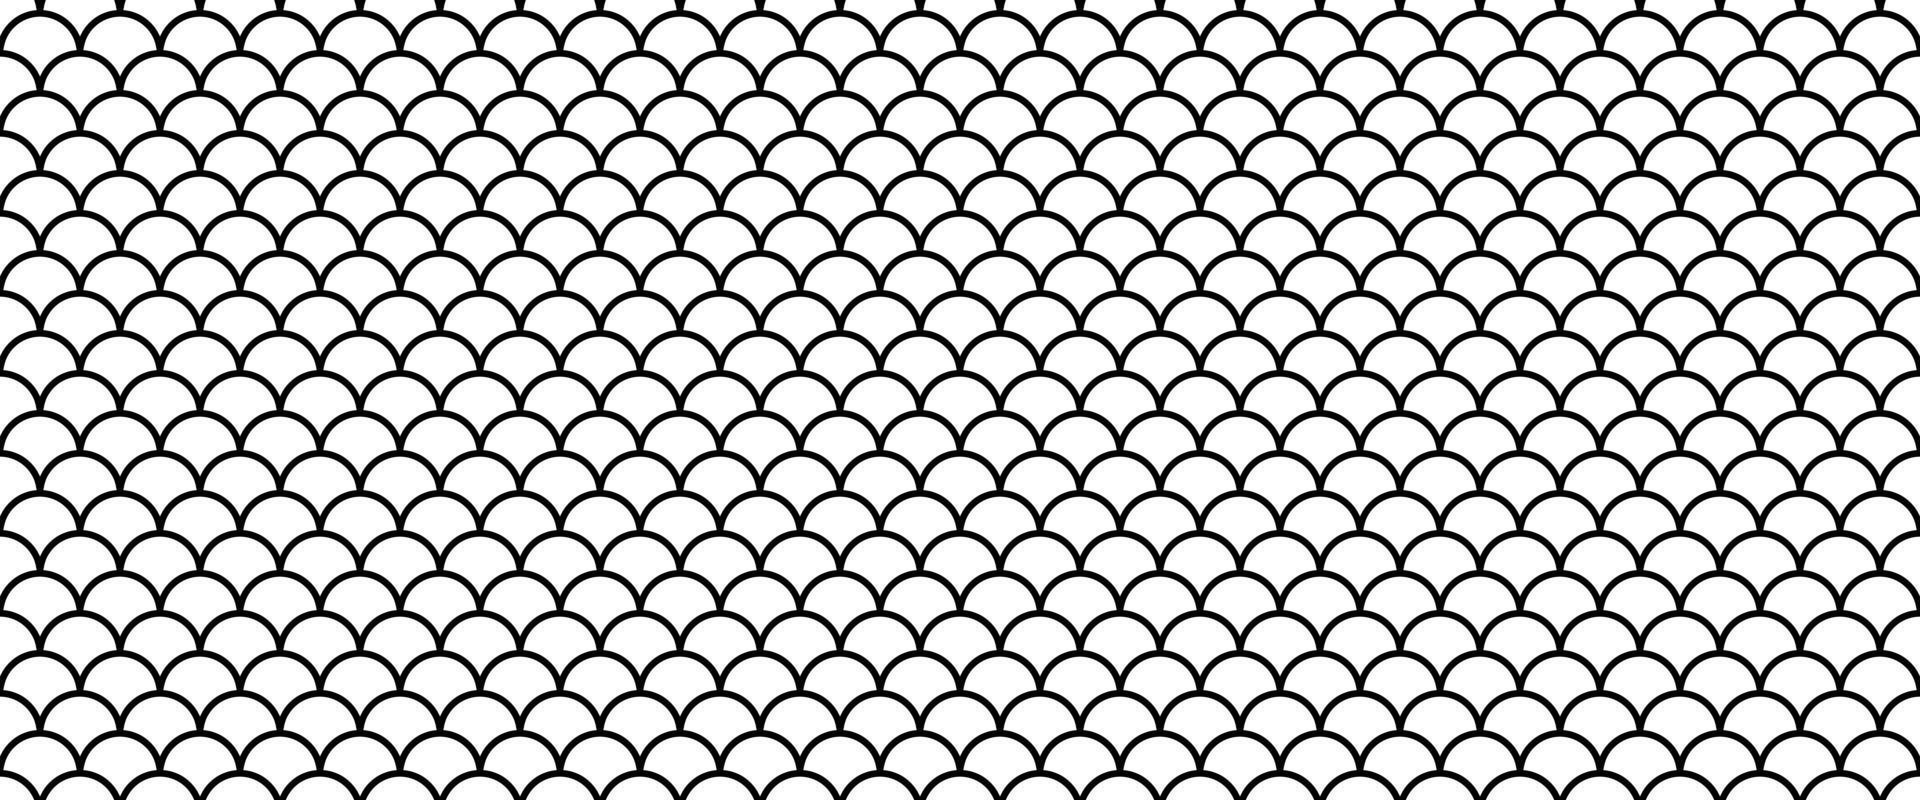 outline fish scale seamless pattern.hand drawing fish skin pattern ...